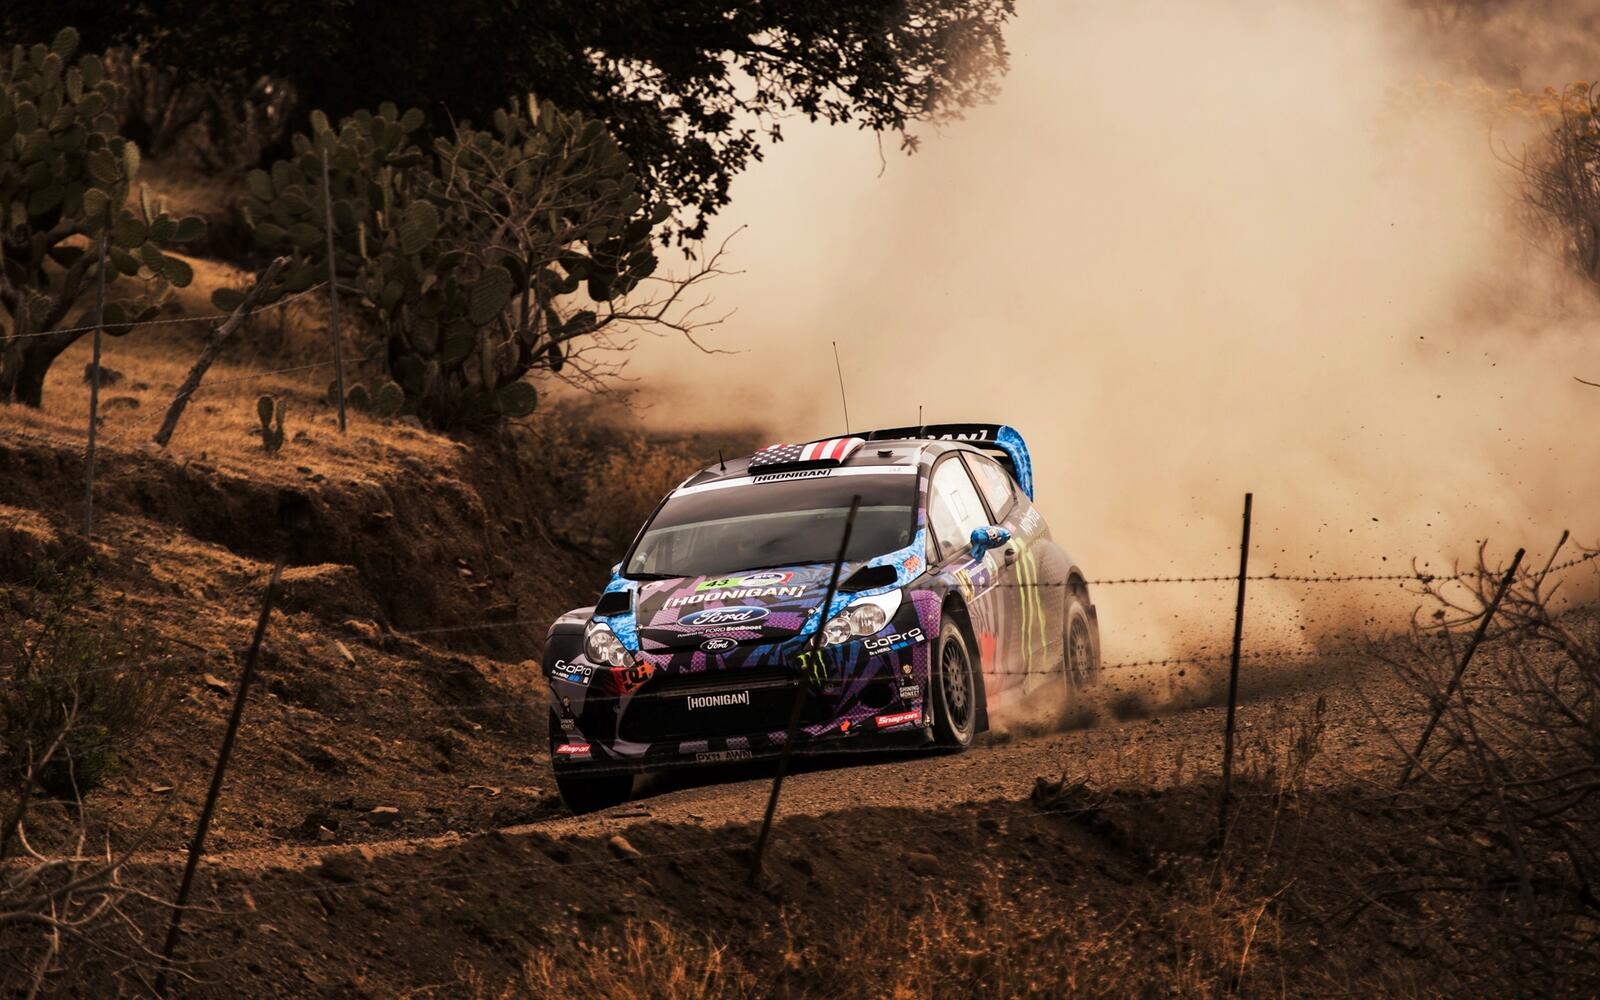 Wallpapers Ford focus rally race on the desktop